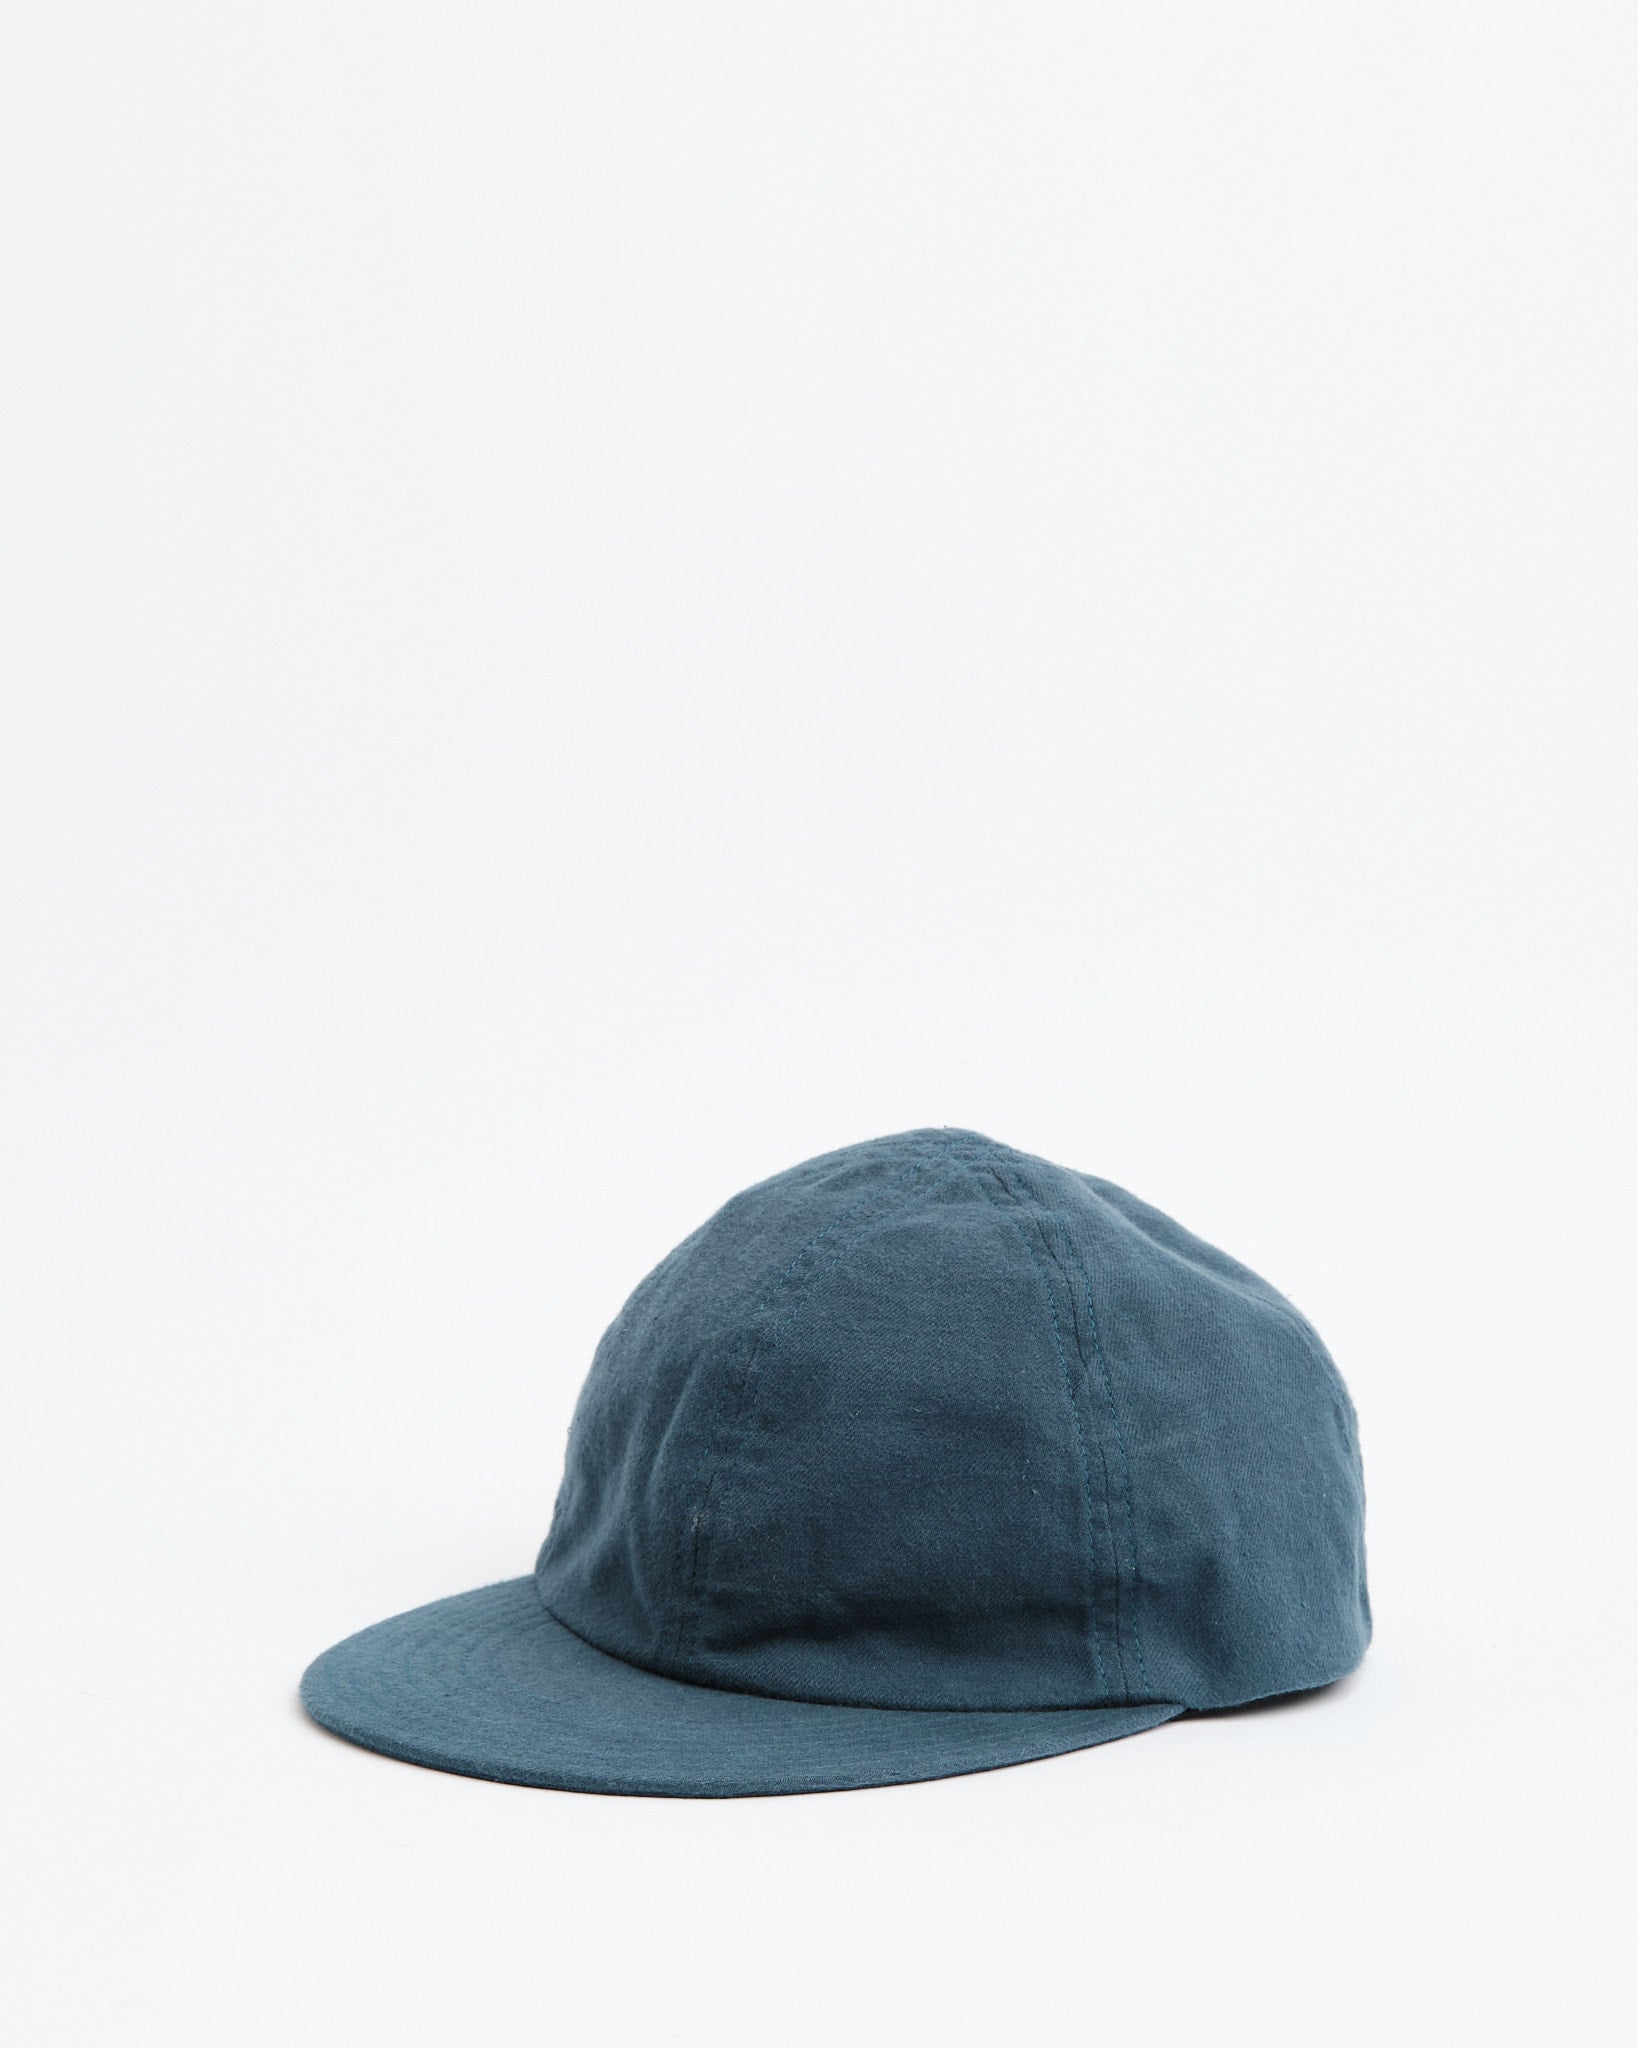 Classic 6 Panel Cap Teal Blue - Meadow